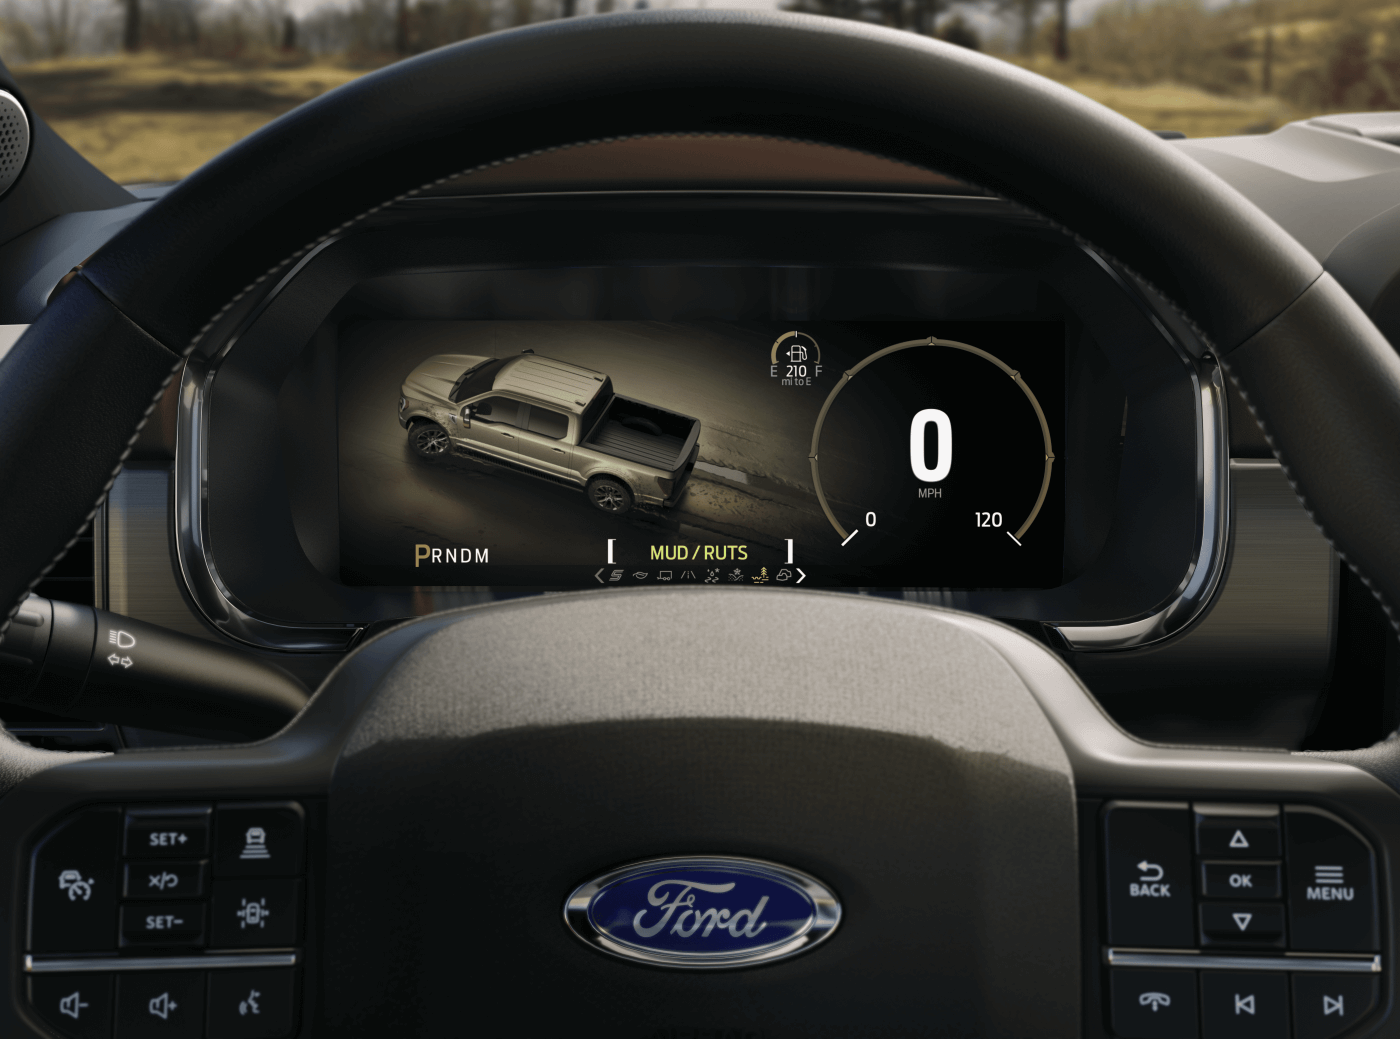 2021 Ford F-150 Technology